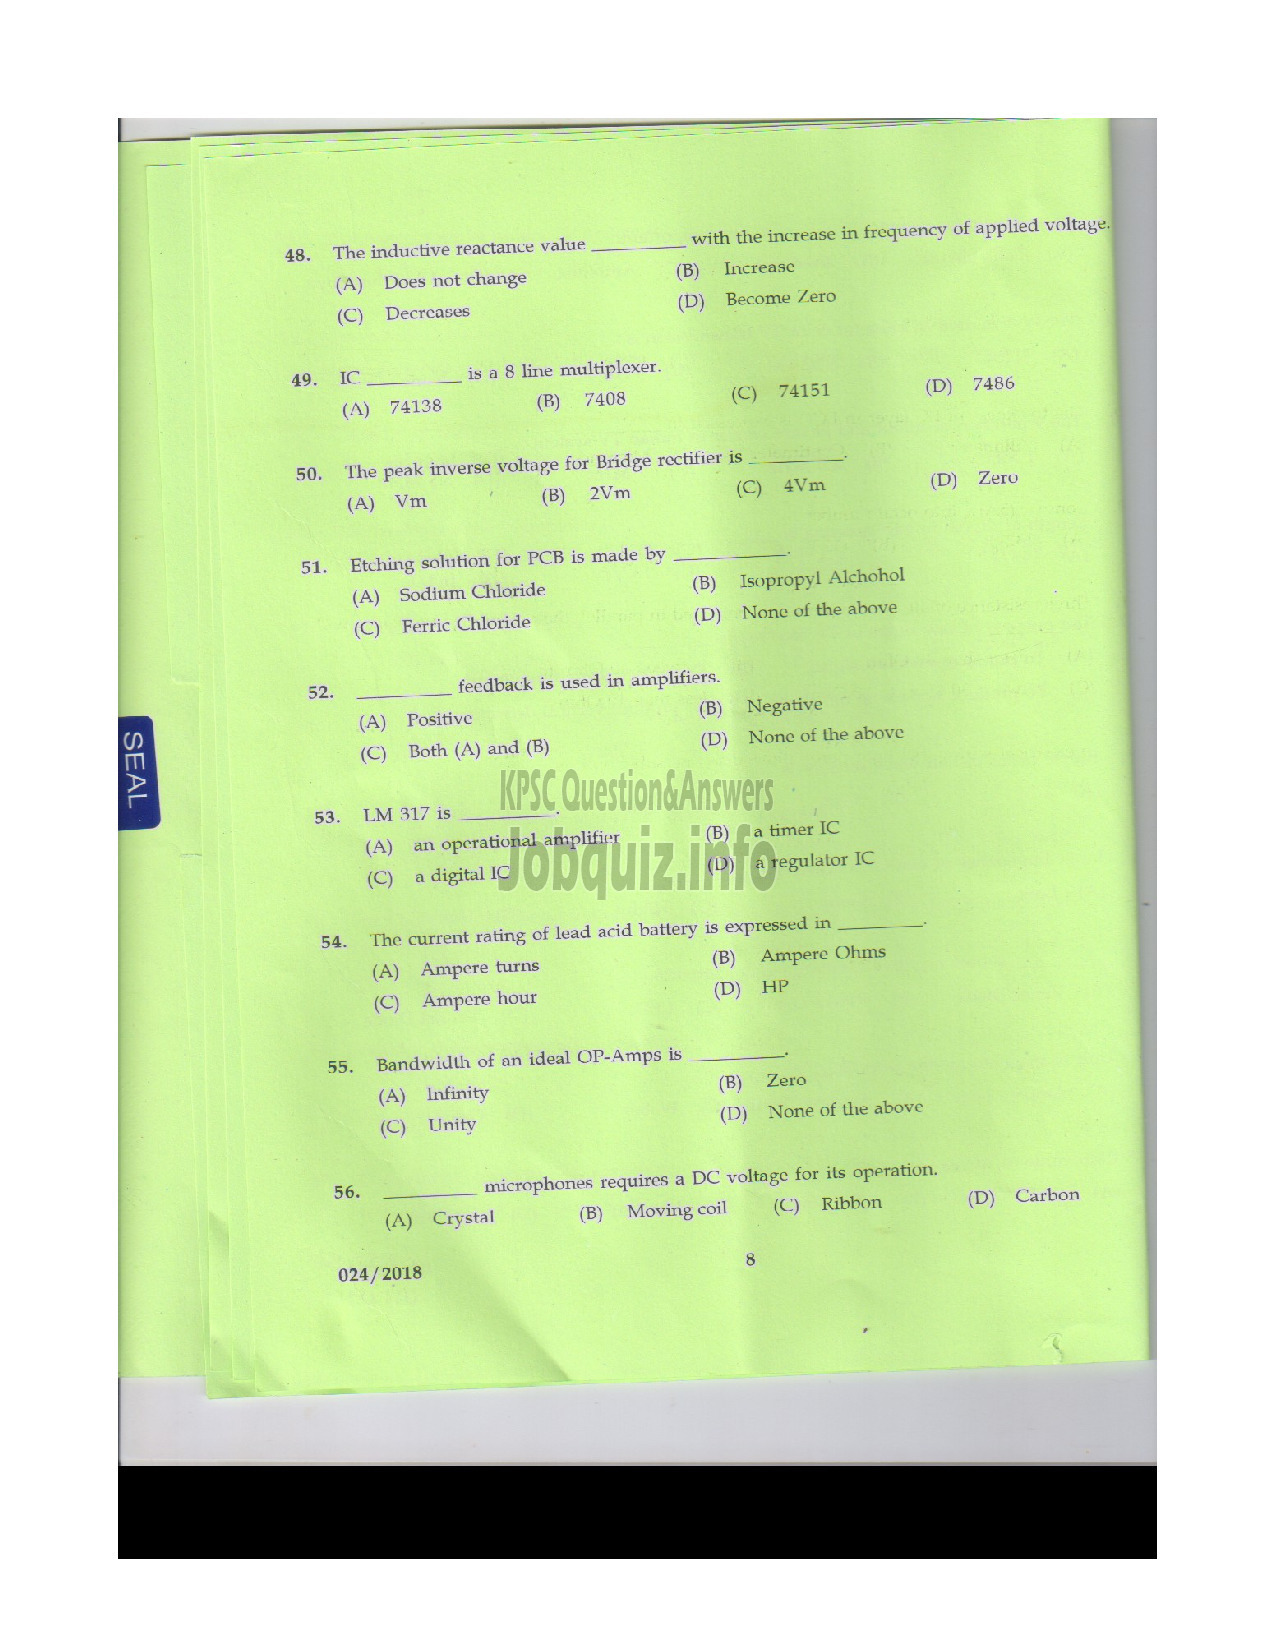 Kerala PSC Question Paper - POLICE CONSTABLE TELECOMMUNICATIONS POLICE-7